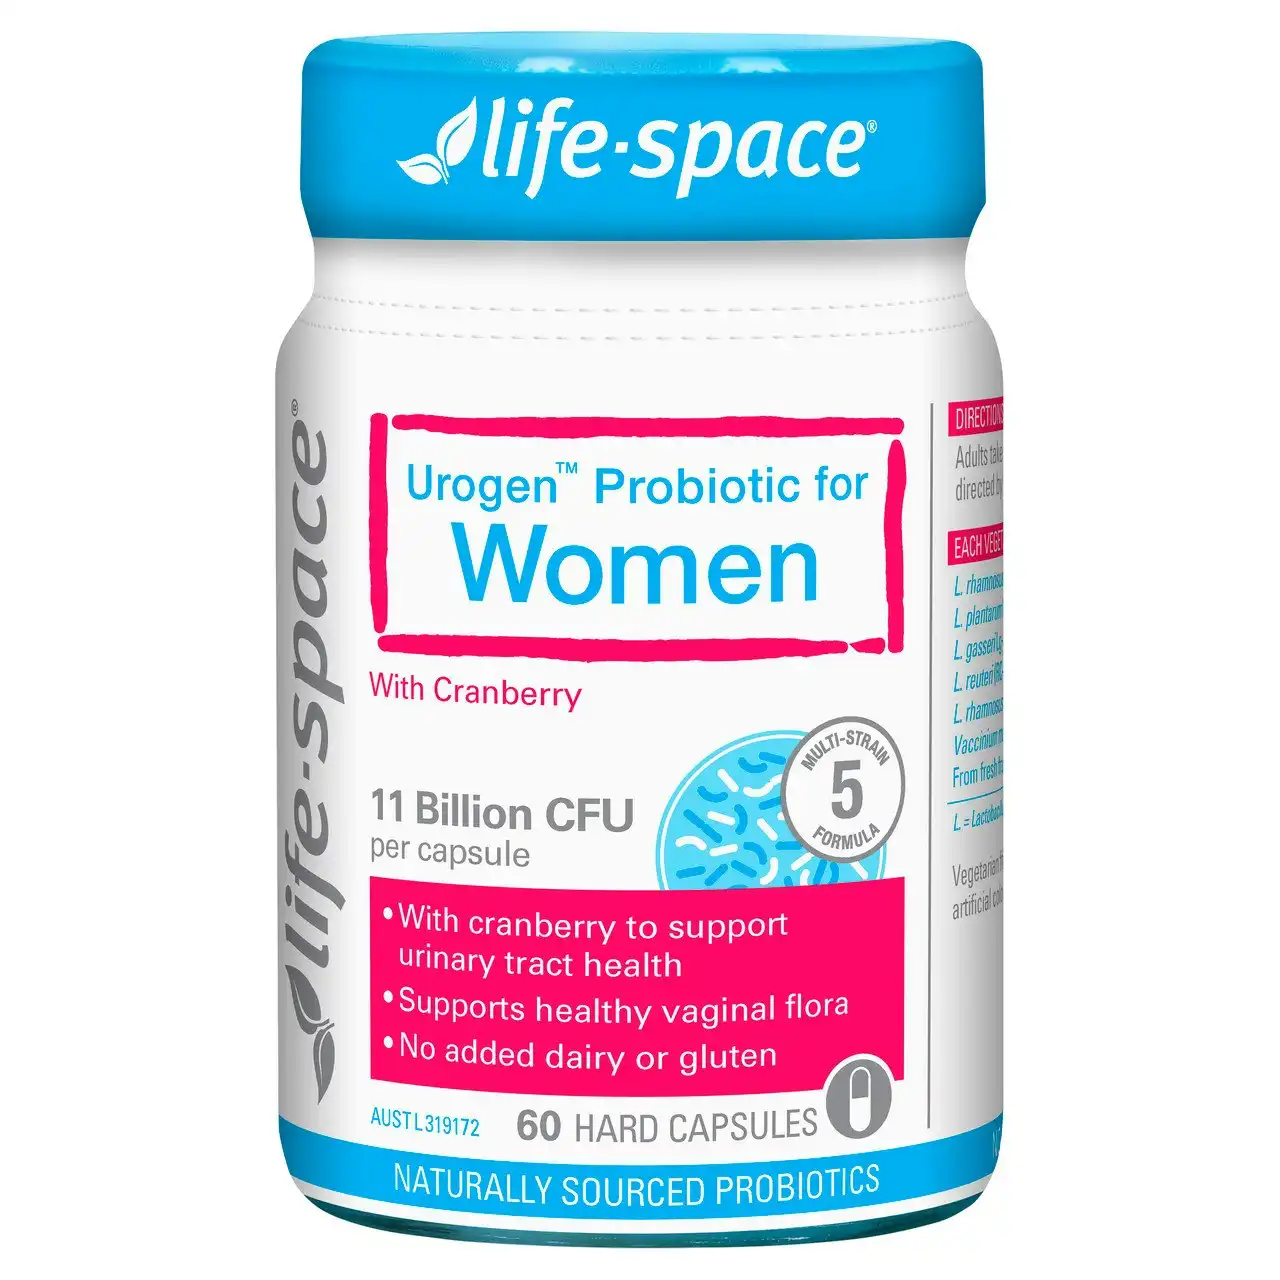 Life-Space Urogen(TM) Probiotic for Women with Cranberry 60 Hard Capsules